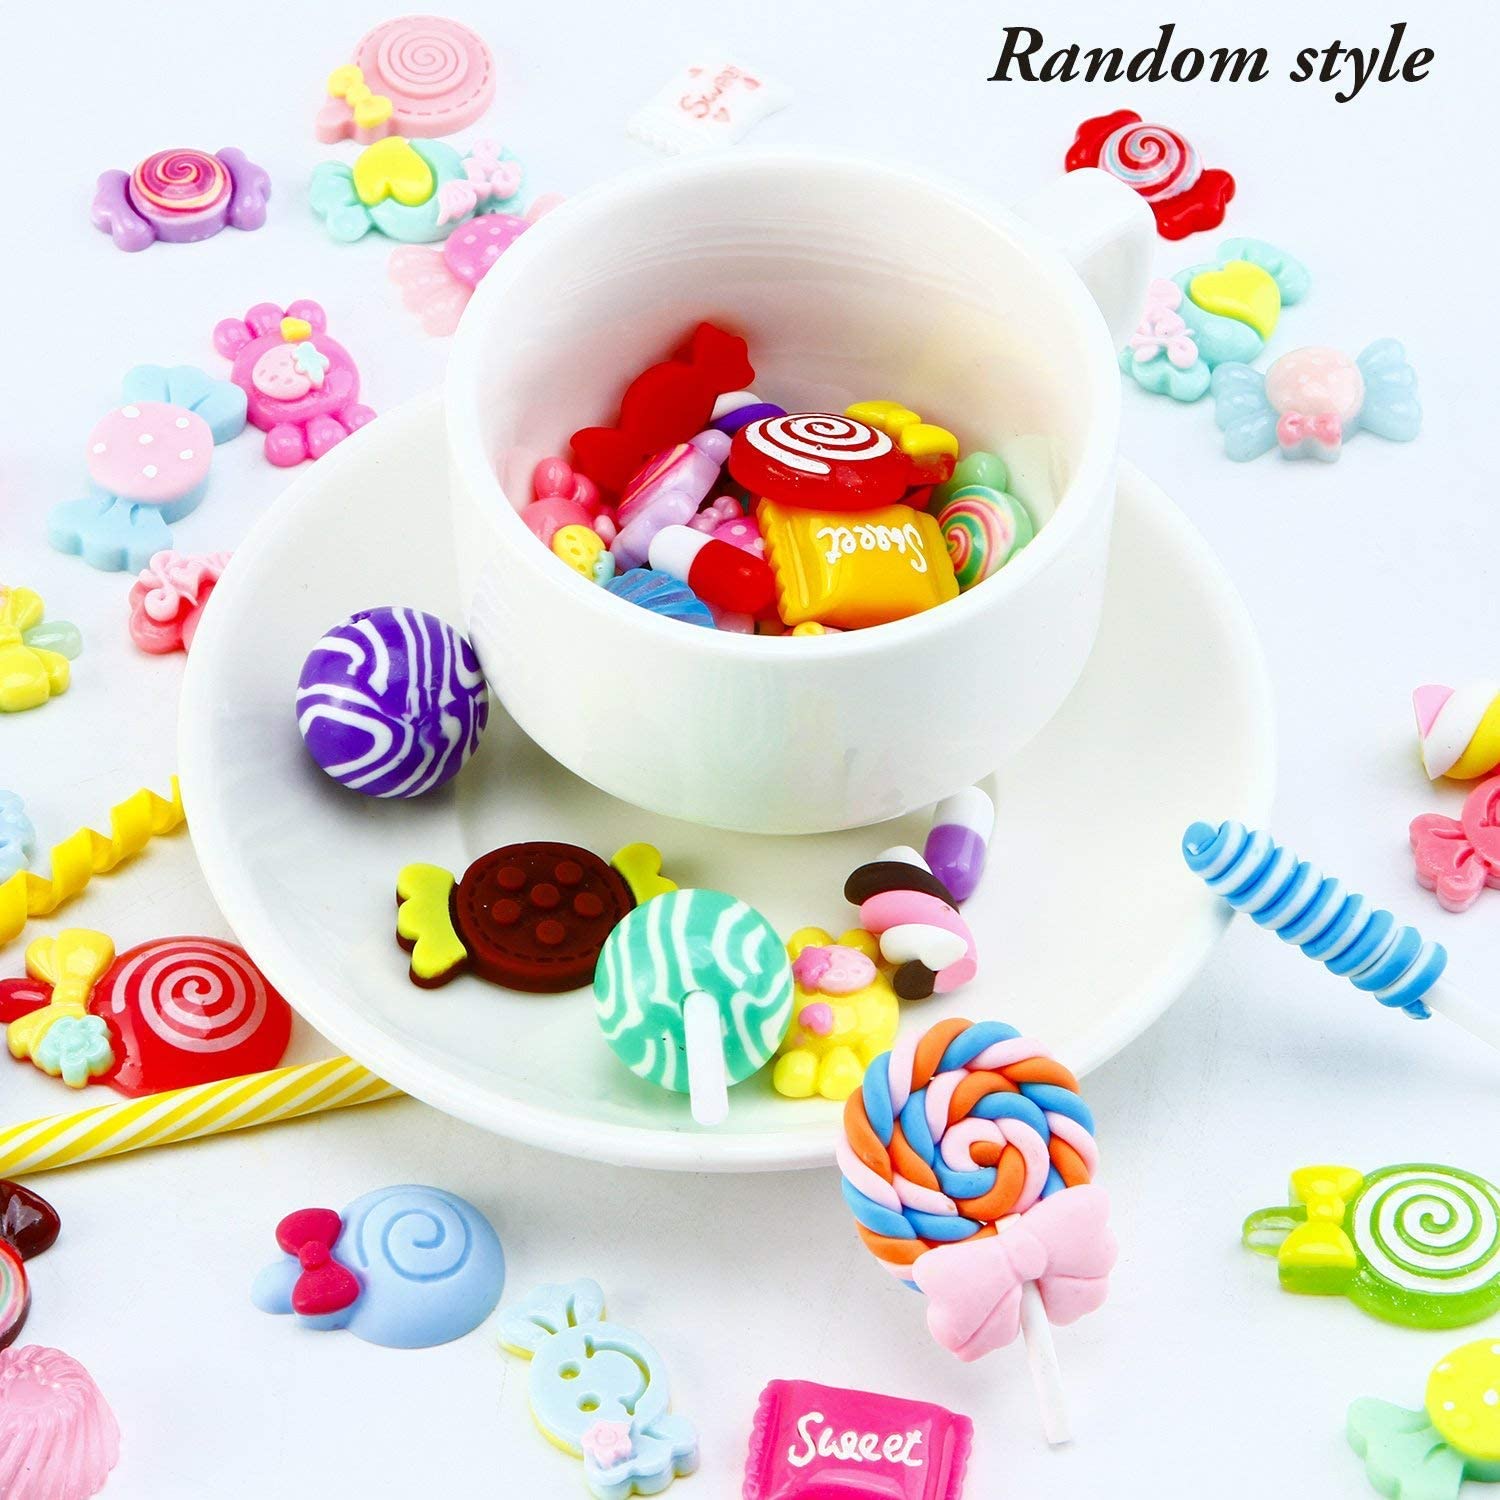 EIMELI Resin Flatback Charms, 60pcs Slime Charms and Containers Mixed Candy Cake Sweets Resin Cabochons for DIY Crafts, Scrapbooking, Jewelry Making Mixed Resin Flatback Slime Beads Making Supplies - image 3 of 8